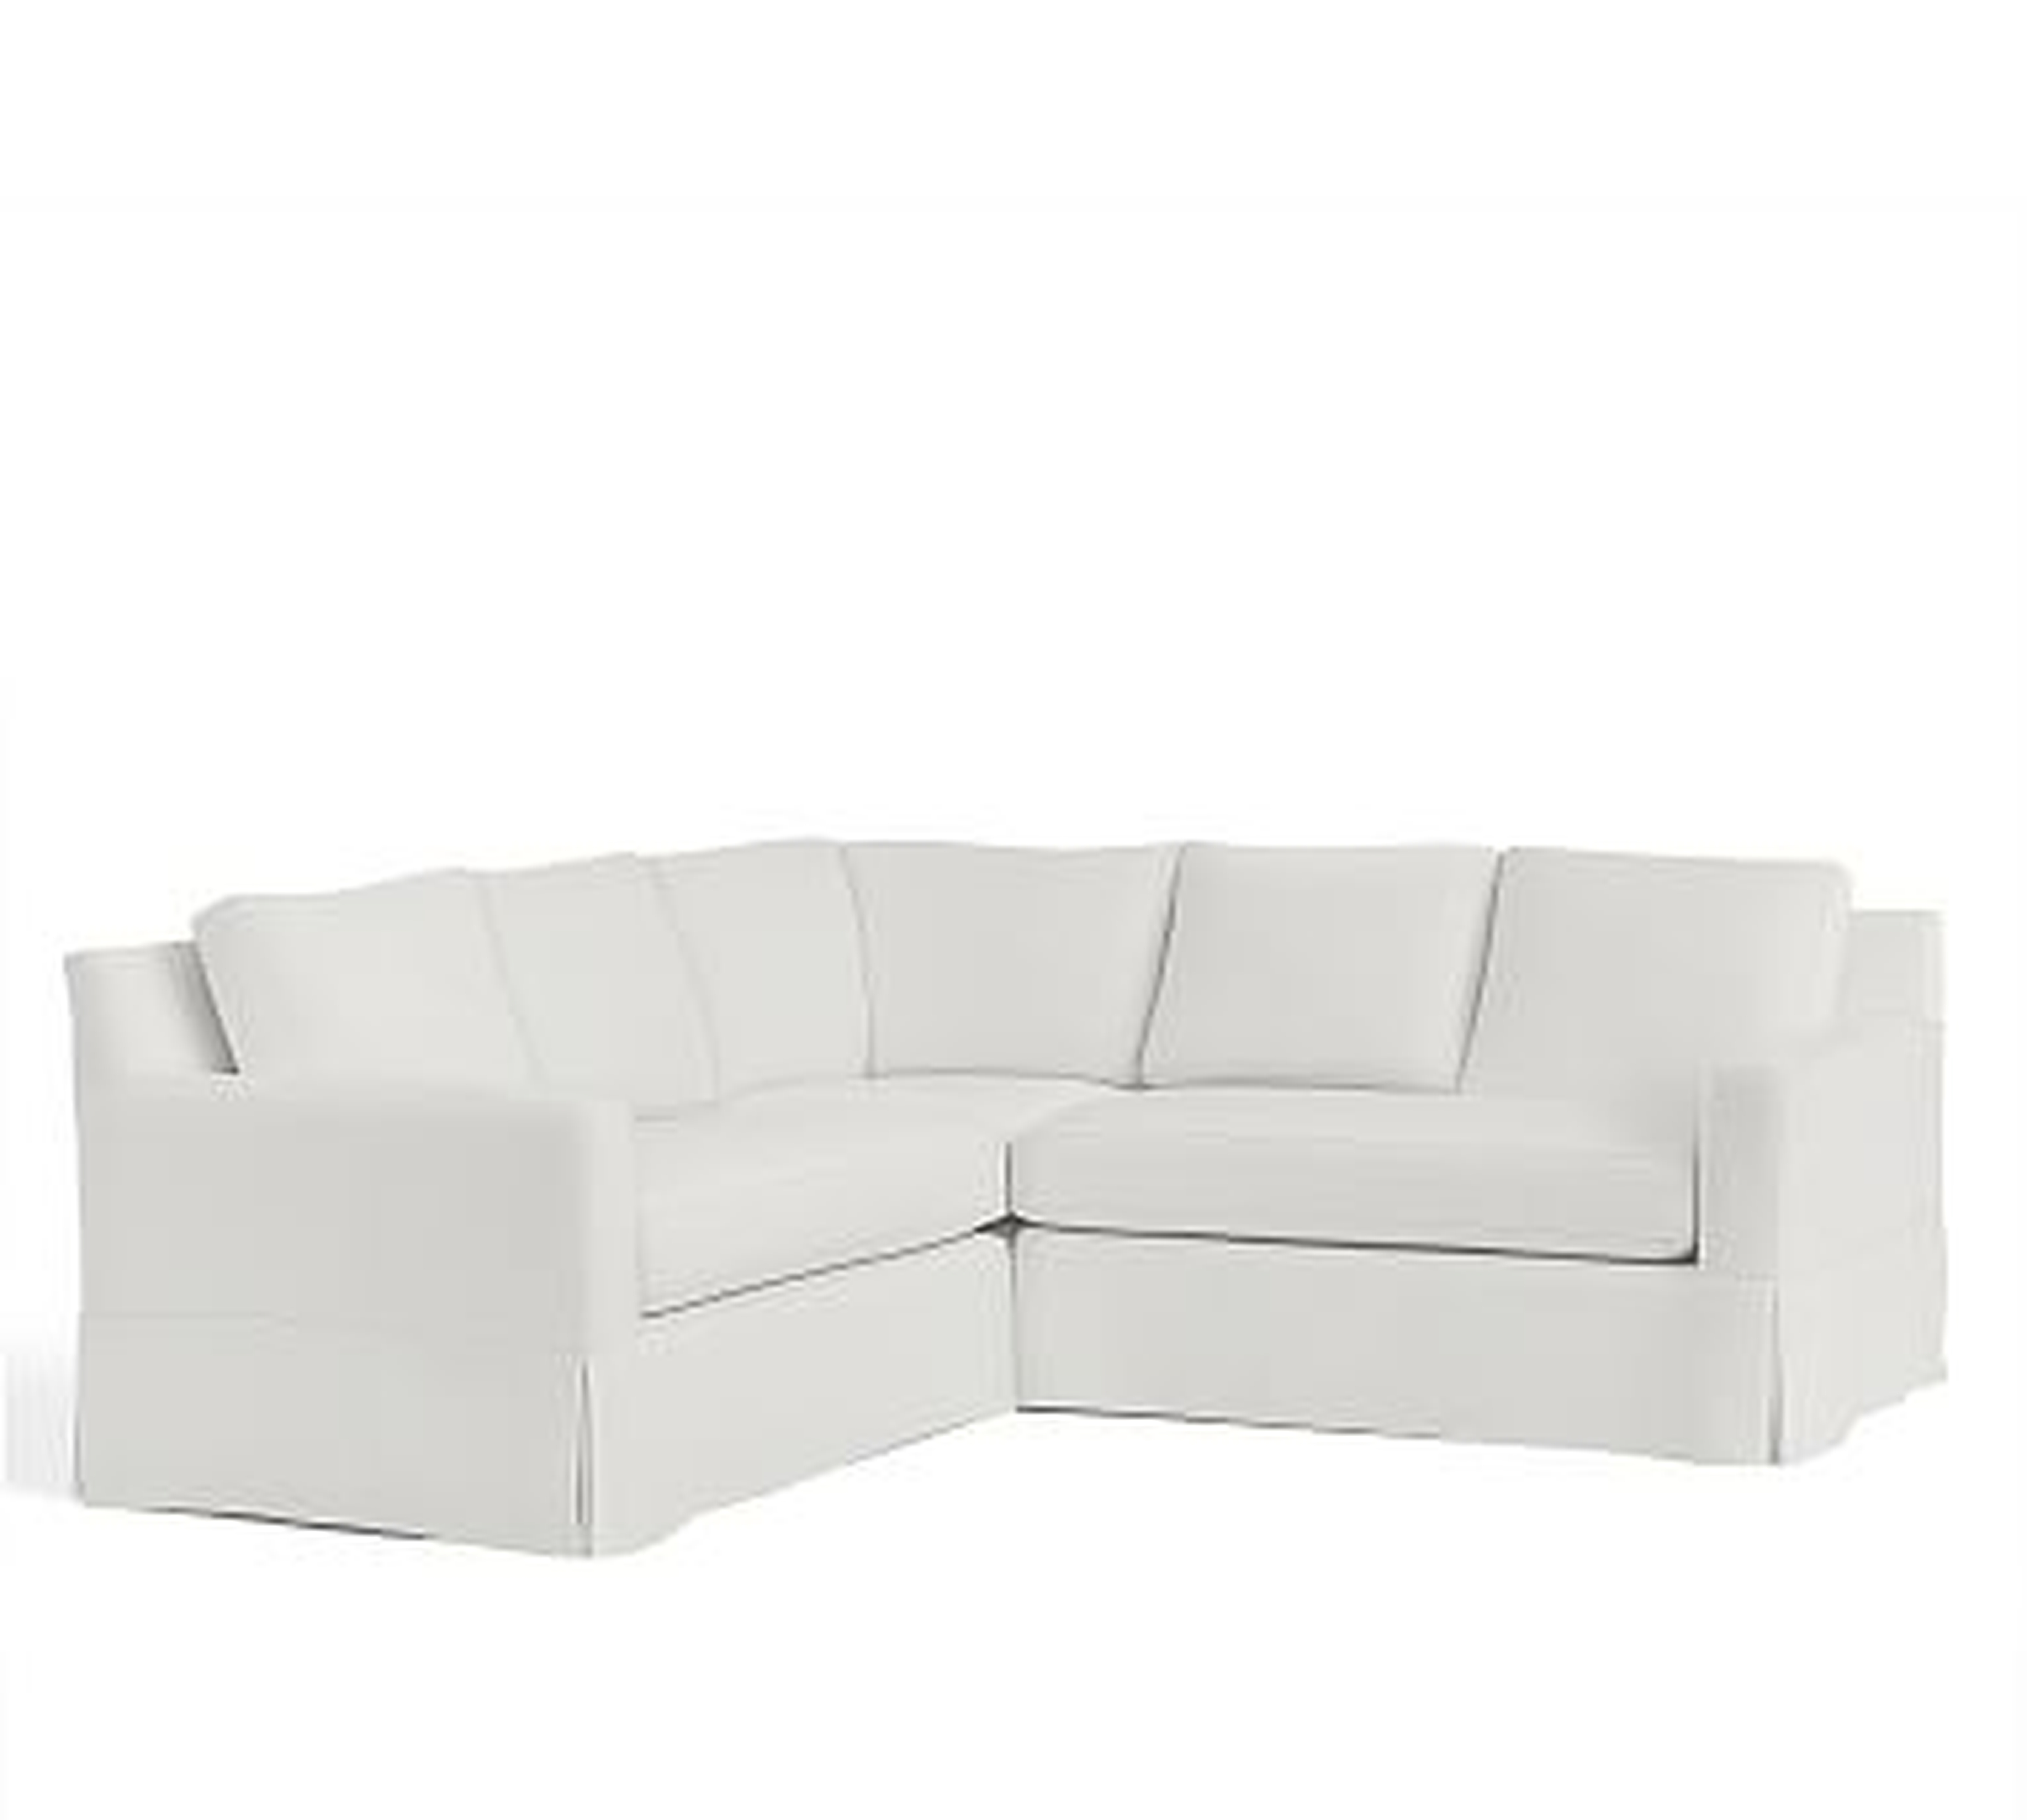 York Slope Arm Slipcovered 3-Piece L-Shaped Corner Sectional, Down Blend Wrapped Cushions, Performance everydaylinen(TM) Ivory - Pottery Barn